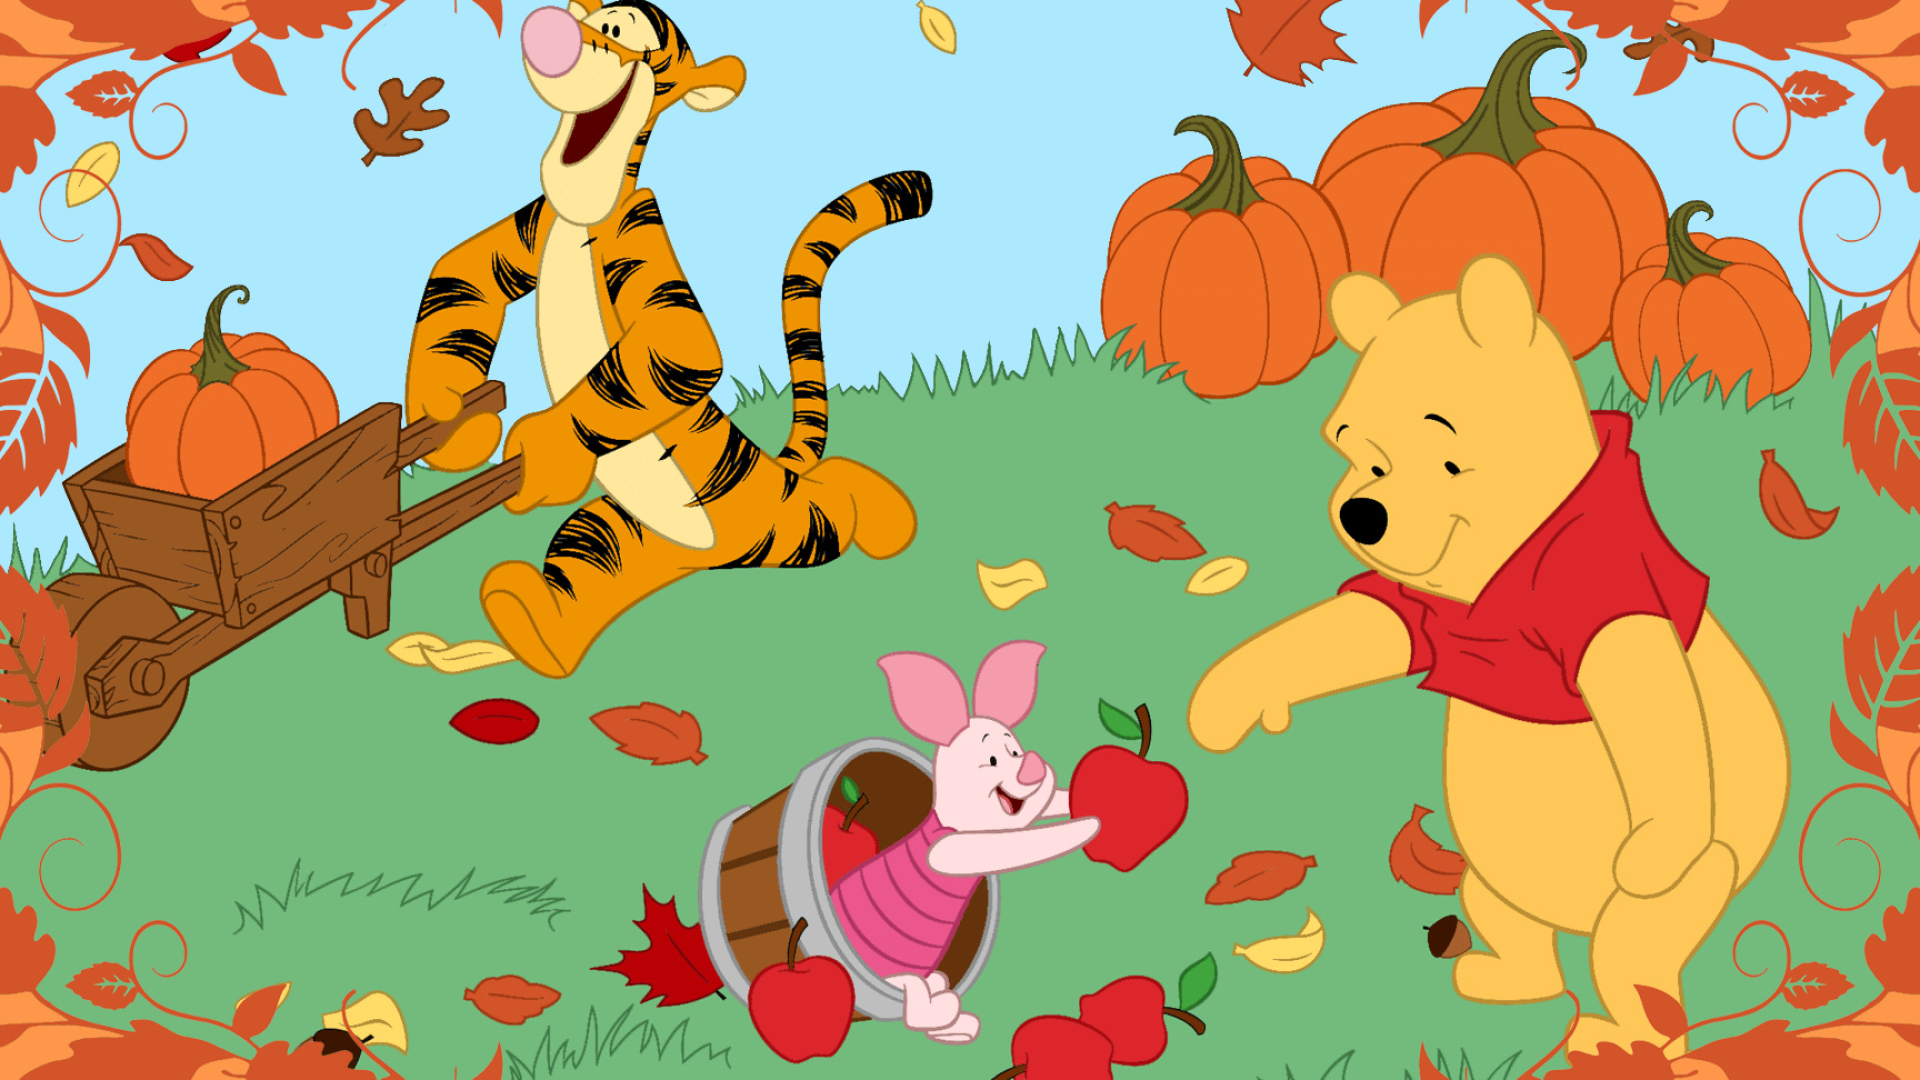 Piglet, Animated character, Winnie-the-Pooh series, Tigger wallpapers, 1920x1080 Full HD Desktop